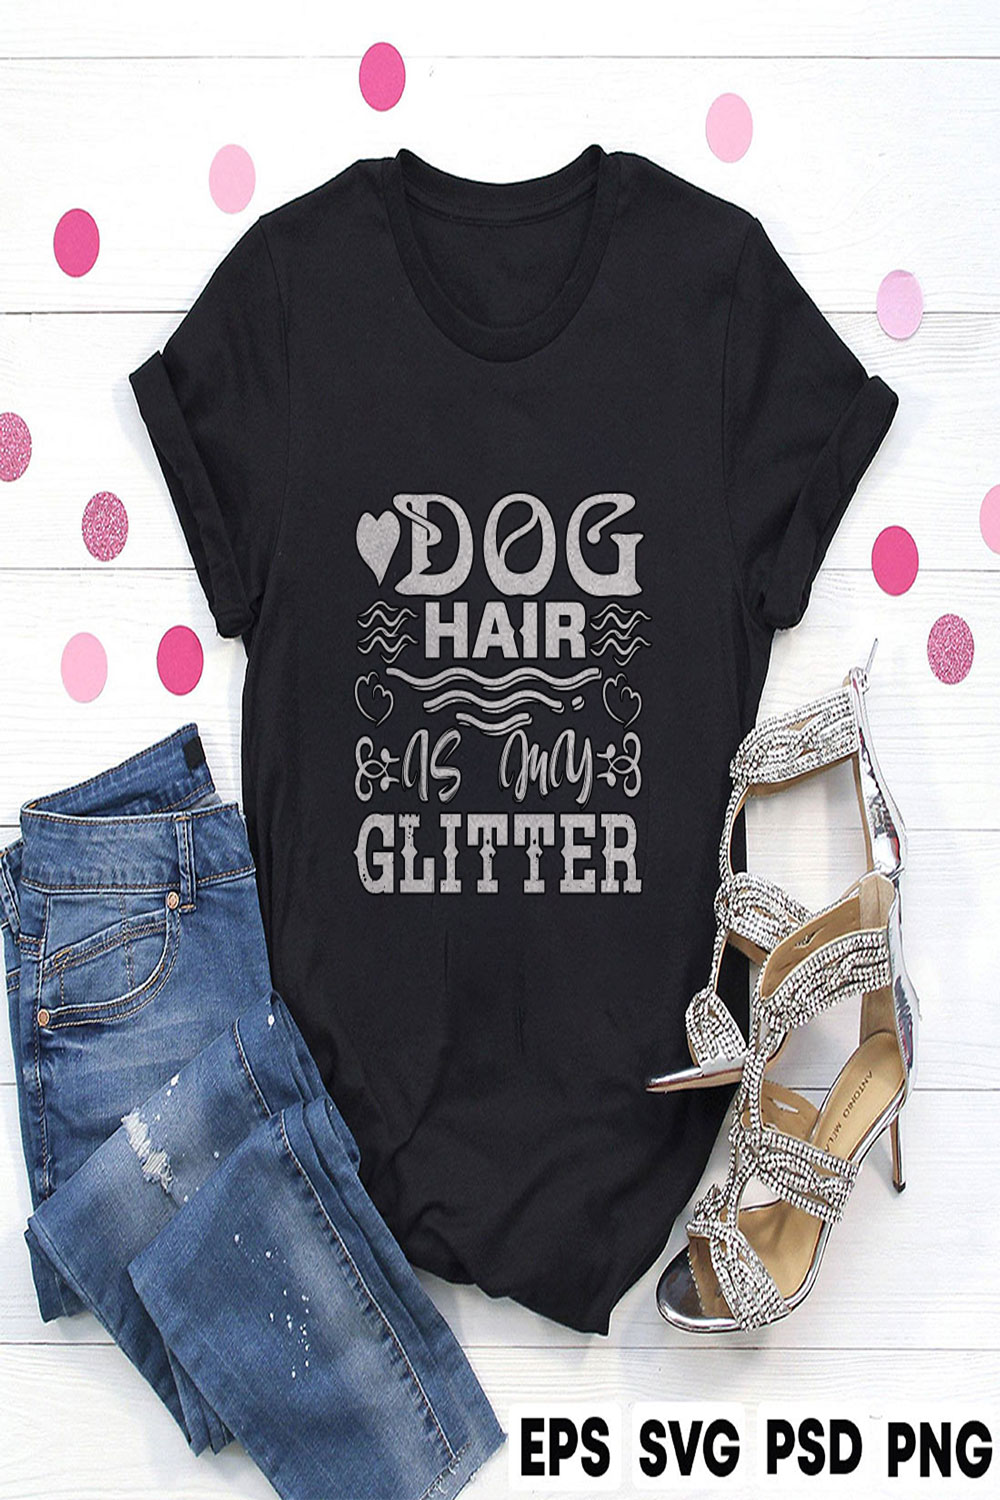 Dog hair is my glitter pinterest preview image.